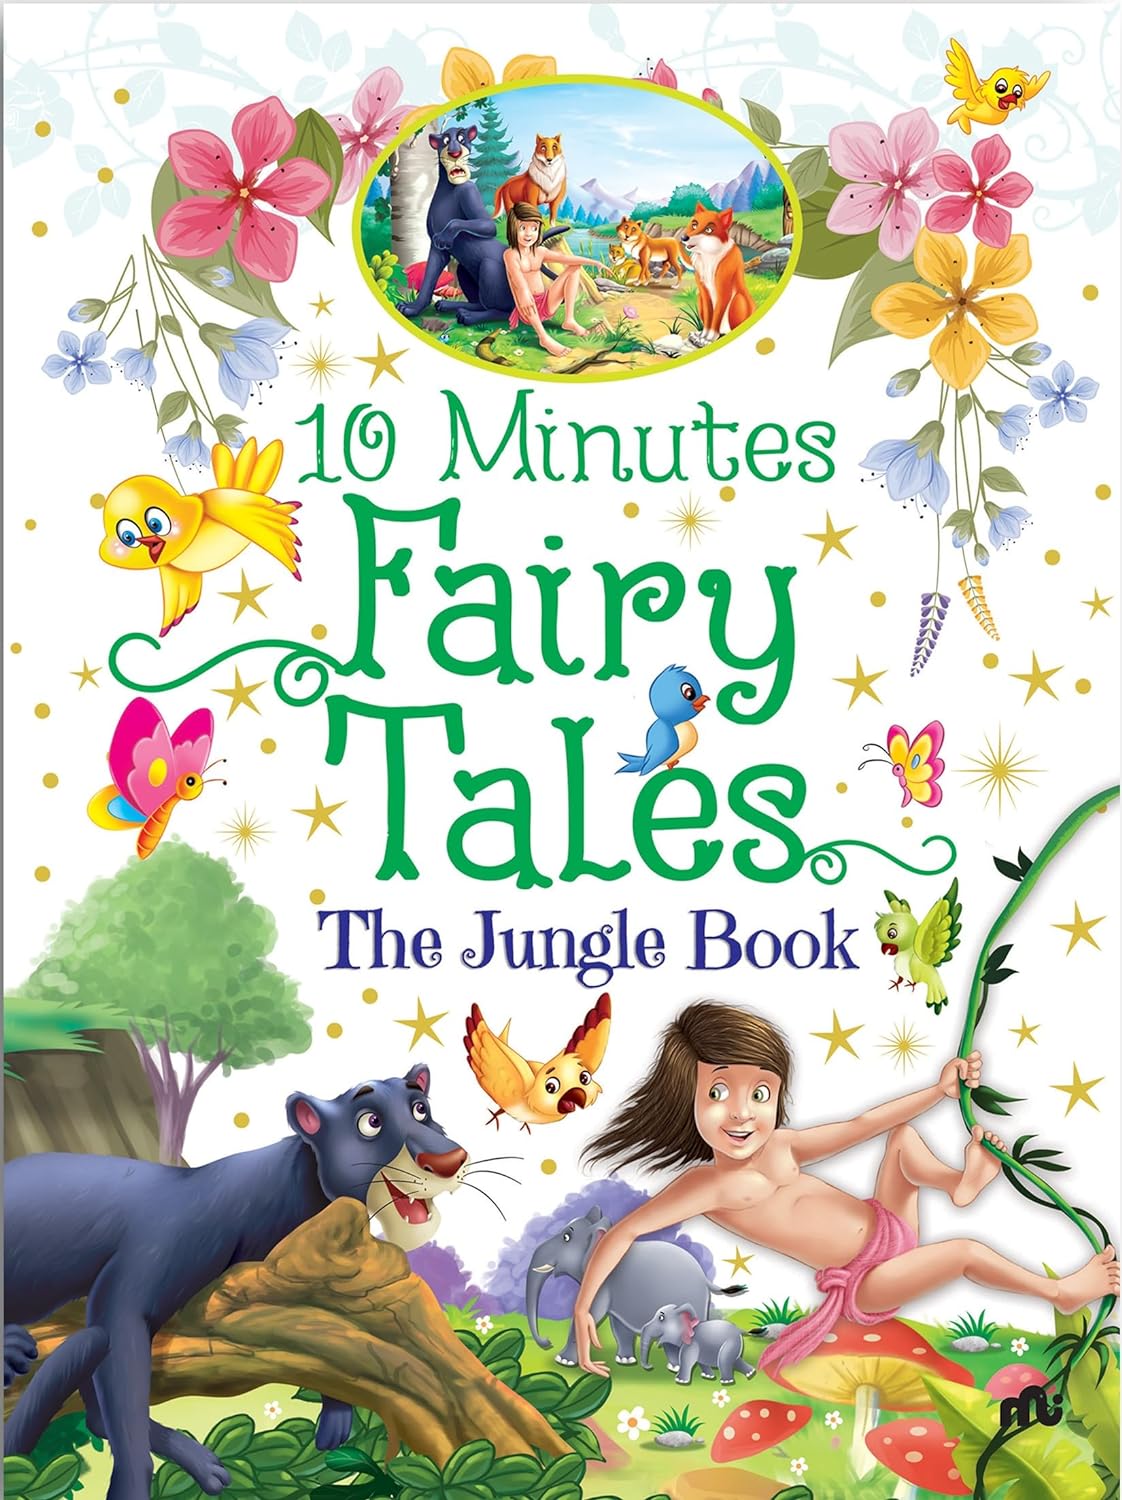 10 Minutes Fairy Tales The Jungle Book